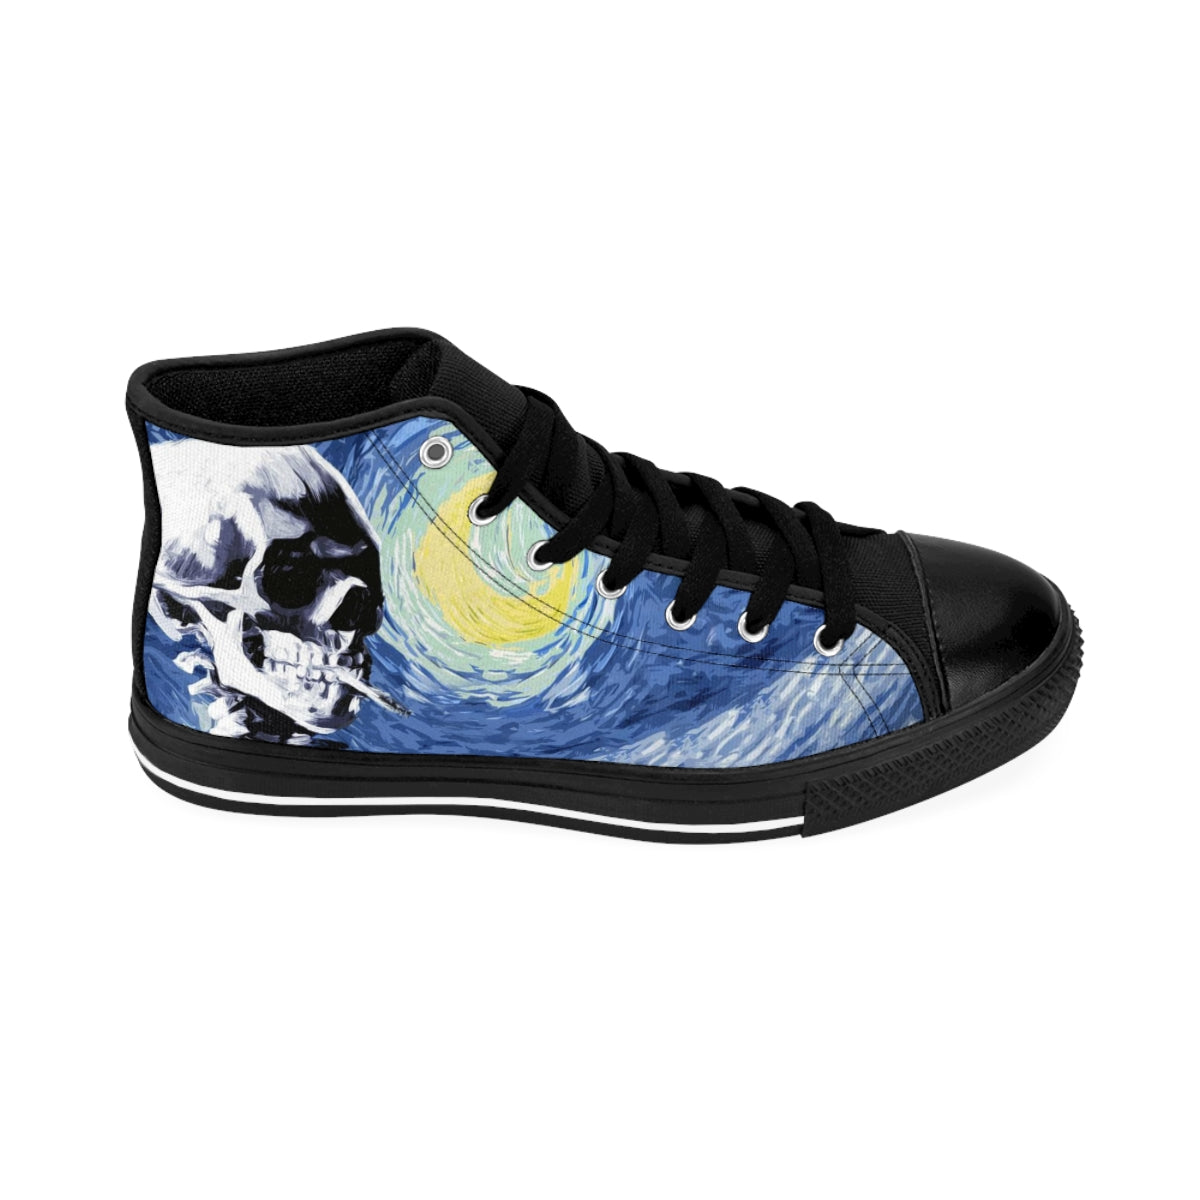 Skull With Burning Cigarette on Starry Night - Van Gogh Tribute | Art Freak High Top Canvas Sneakers